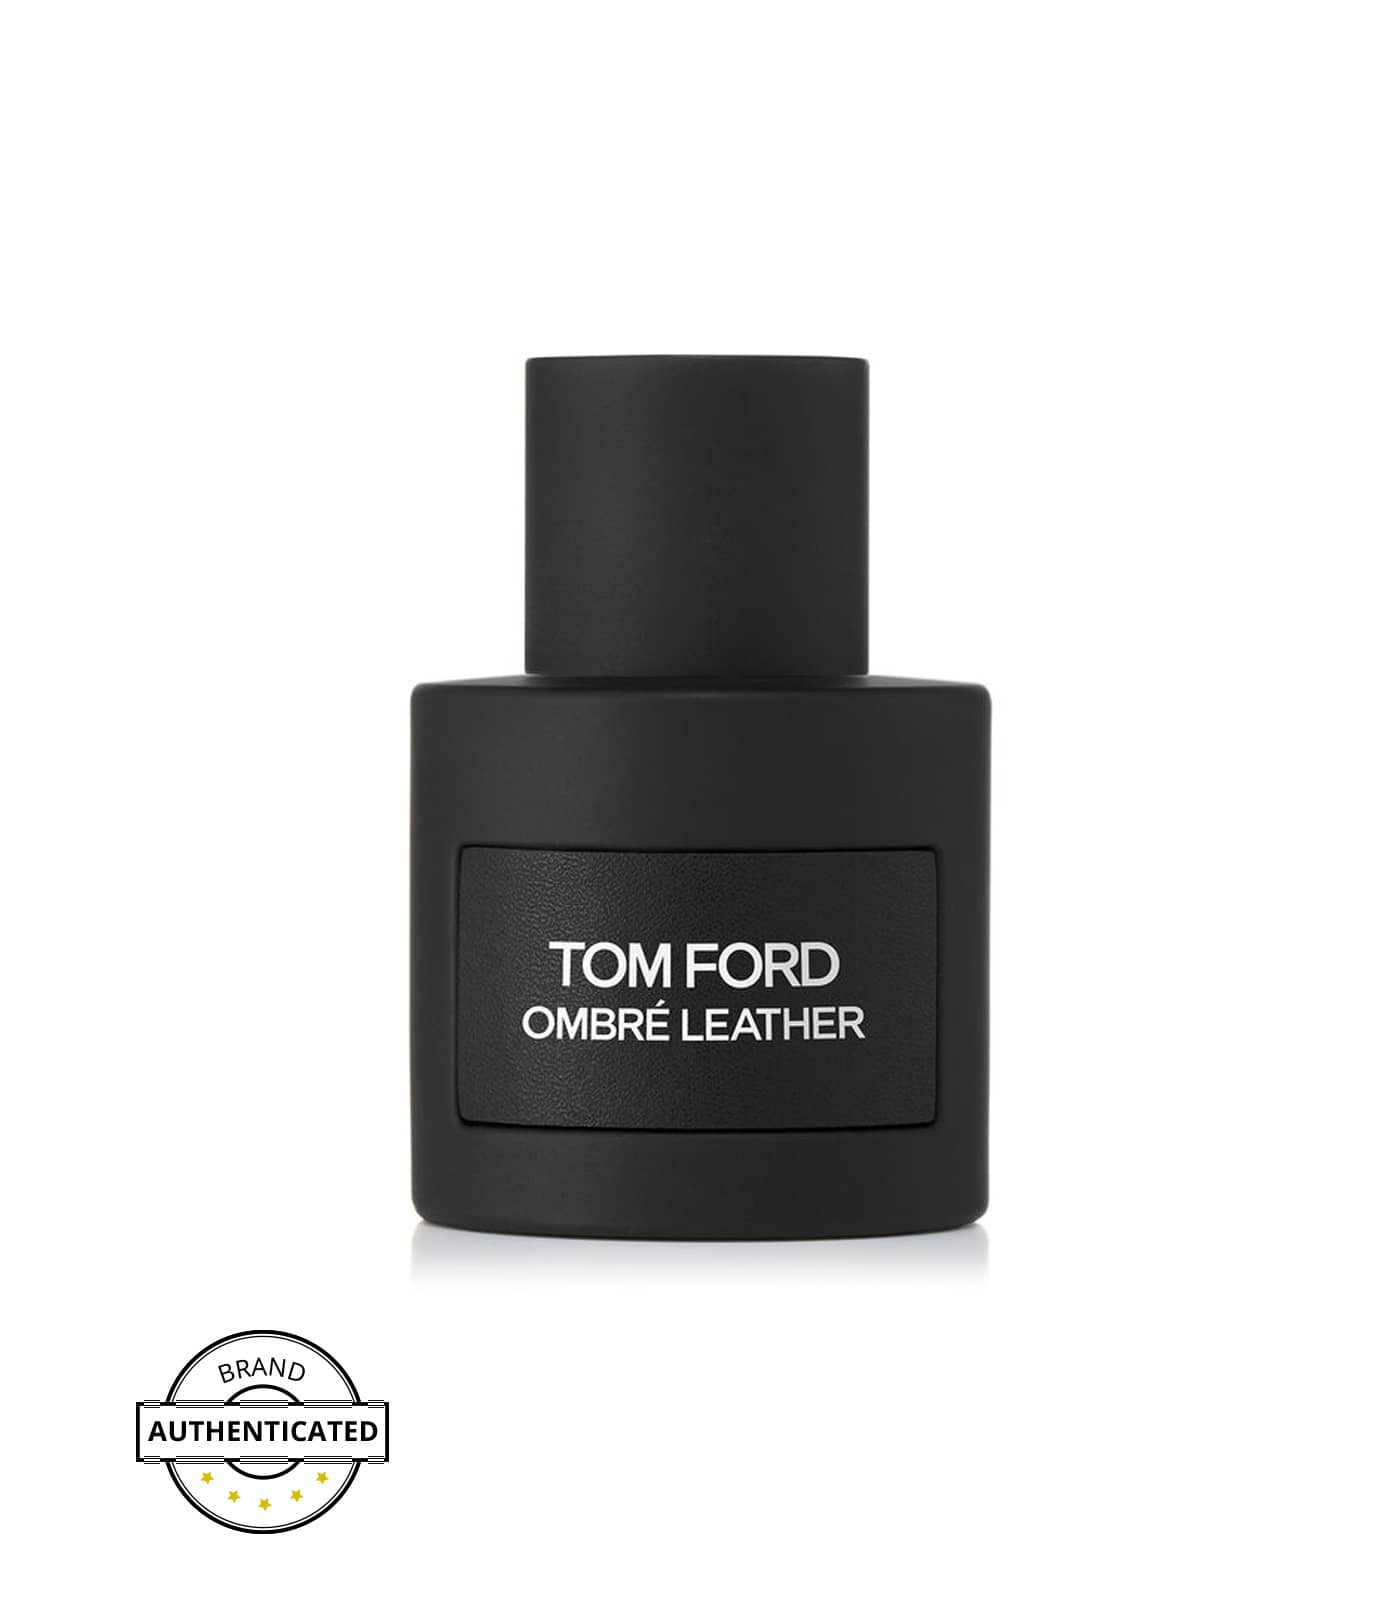 Tom Ford Ombre Leather For Unisex EDP 100 ml - Allure Essence